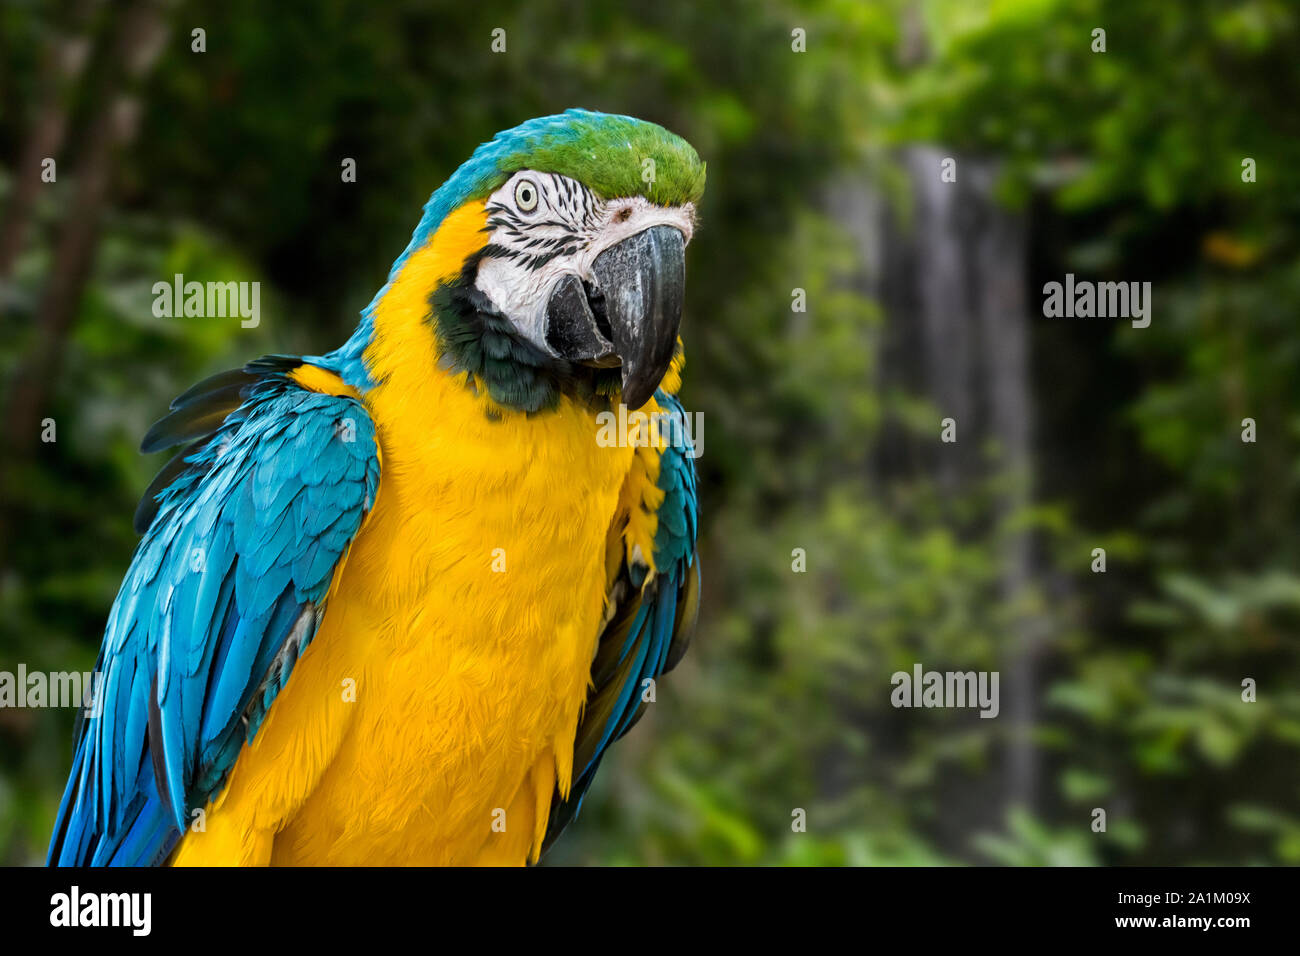 Blue-and-yellow macaw / blue-and-gold macaw (Ara ararauna) South American  parrot native to Venezuela, Peru, Brazil, Bolivia, and Paraguay Stock Photo  - Alamy